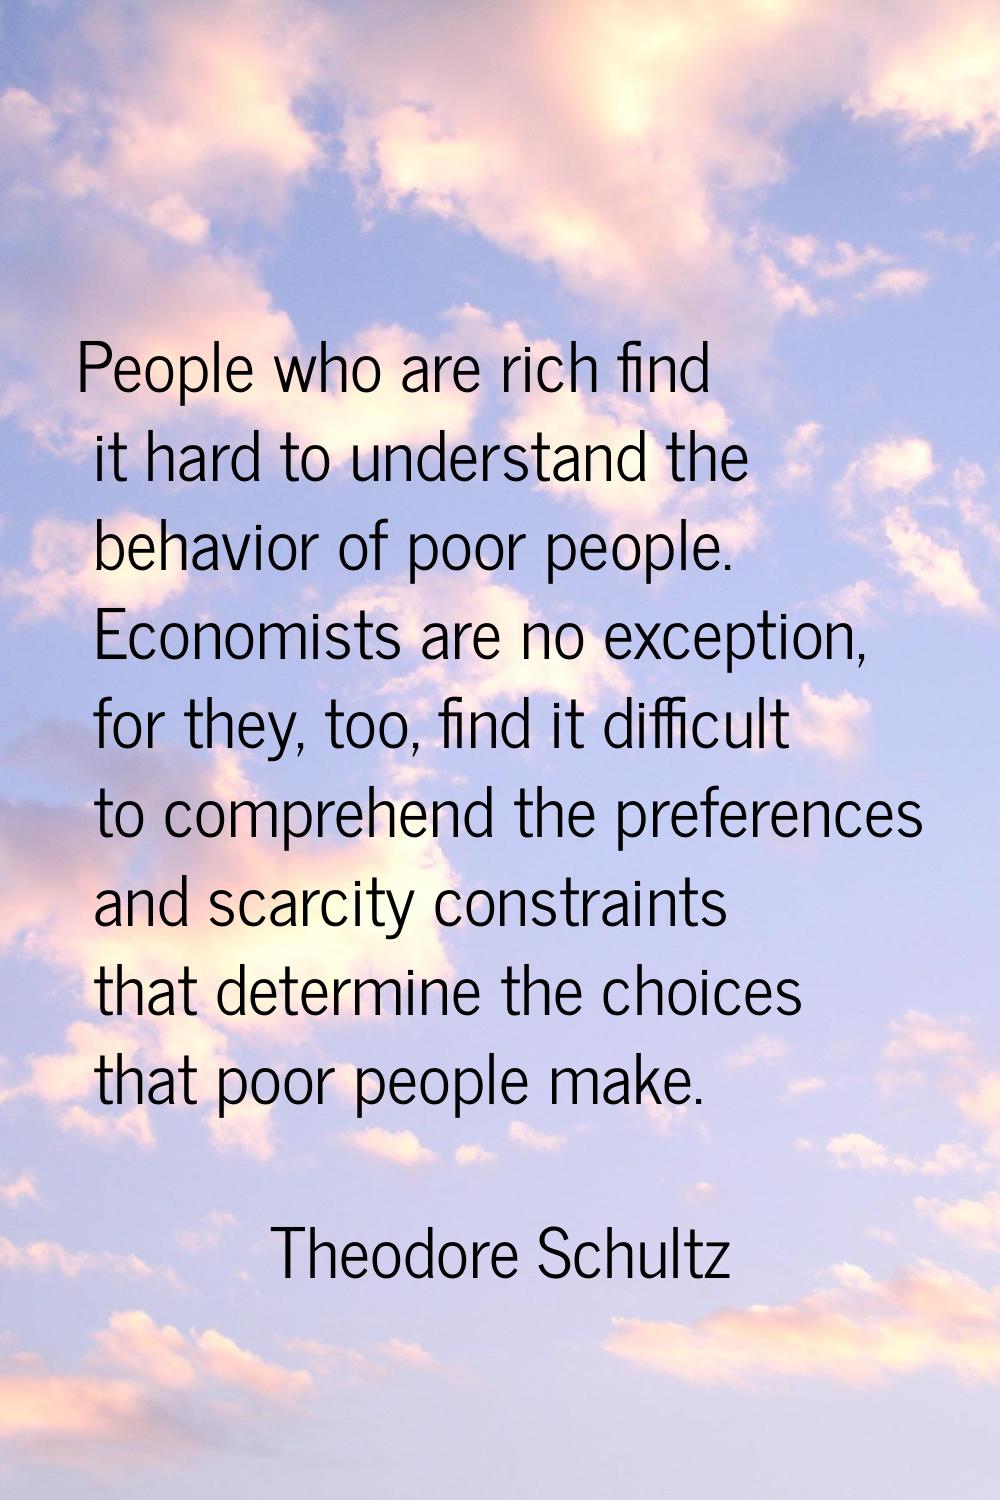 People who are rich find it hard to understand the behavior of poor people. Economists are no excep